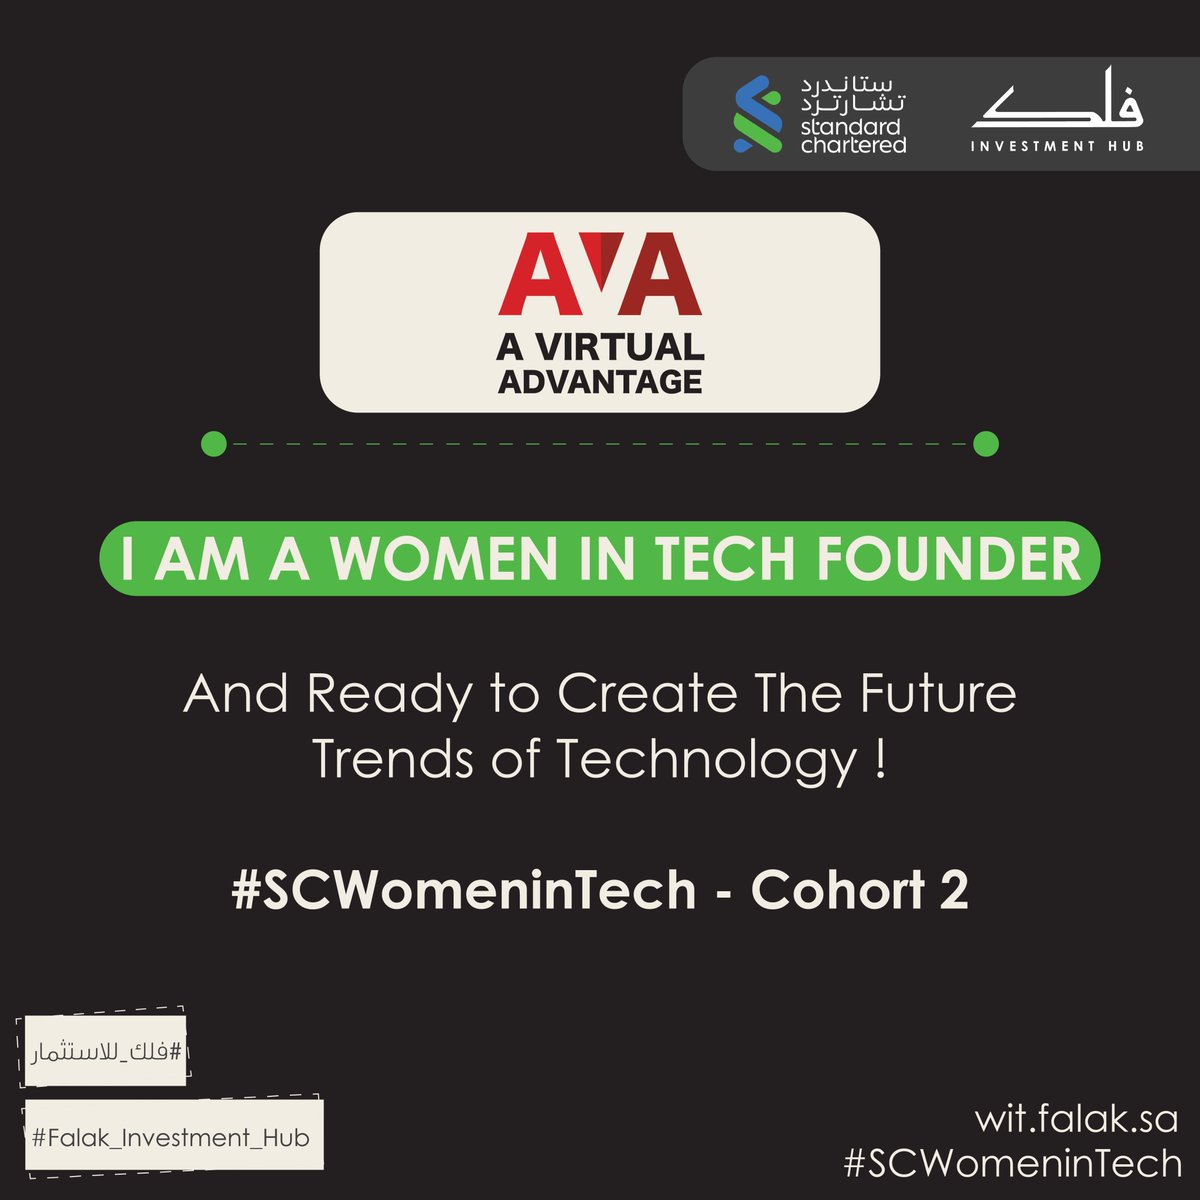 Excited to be a part of Women in Tech Founder! 🌟 Ready to create the future trends of technology. 🚀 #SCWomeninTech #FalakWIT #Falak_Investment_Hub #فلك_للاستثمار